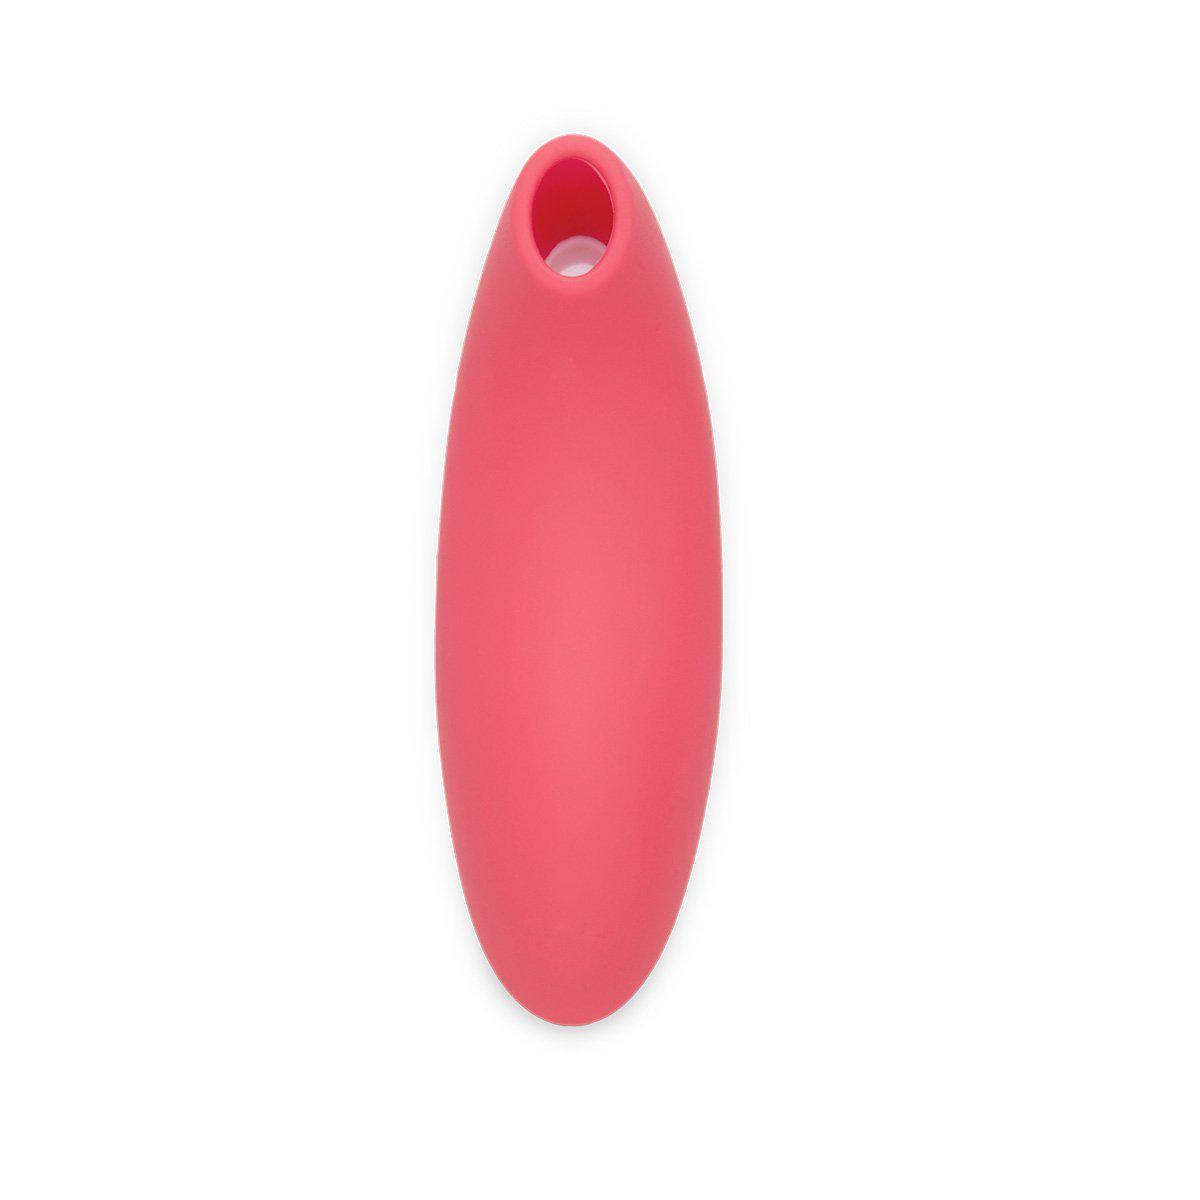 The open hollow tip of the We-Vibe Melt faces the camera. The hollow tip is built into the toy's surface itself. It is not an interchangeable tip. The toy looks like a really long oval. | Kinkly Shop